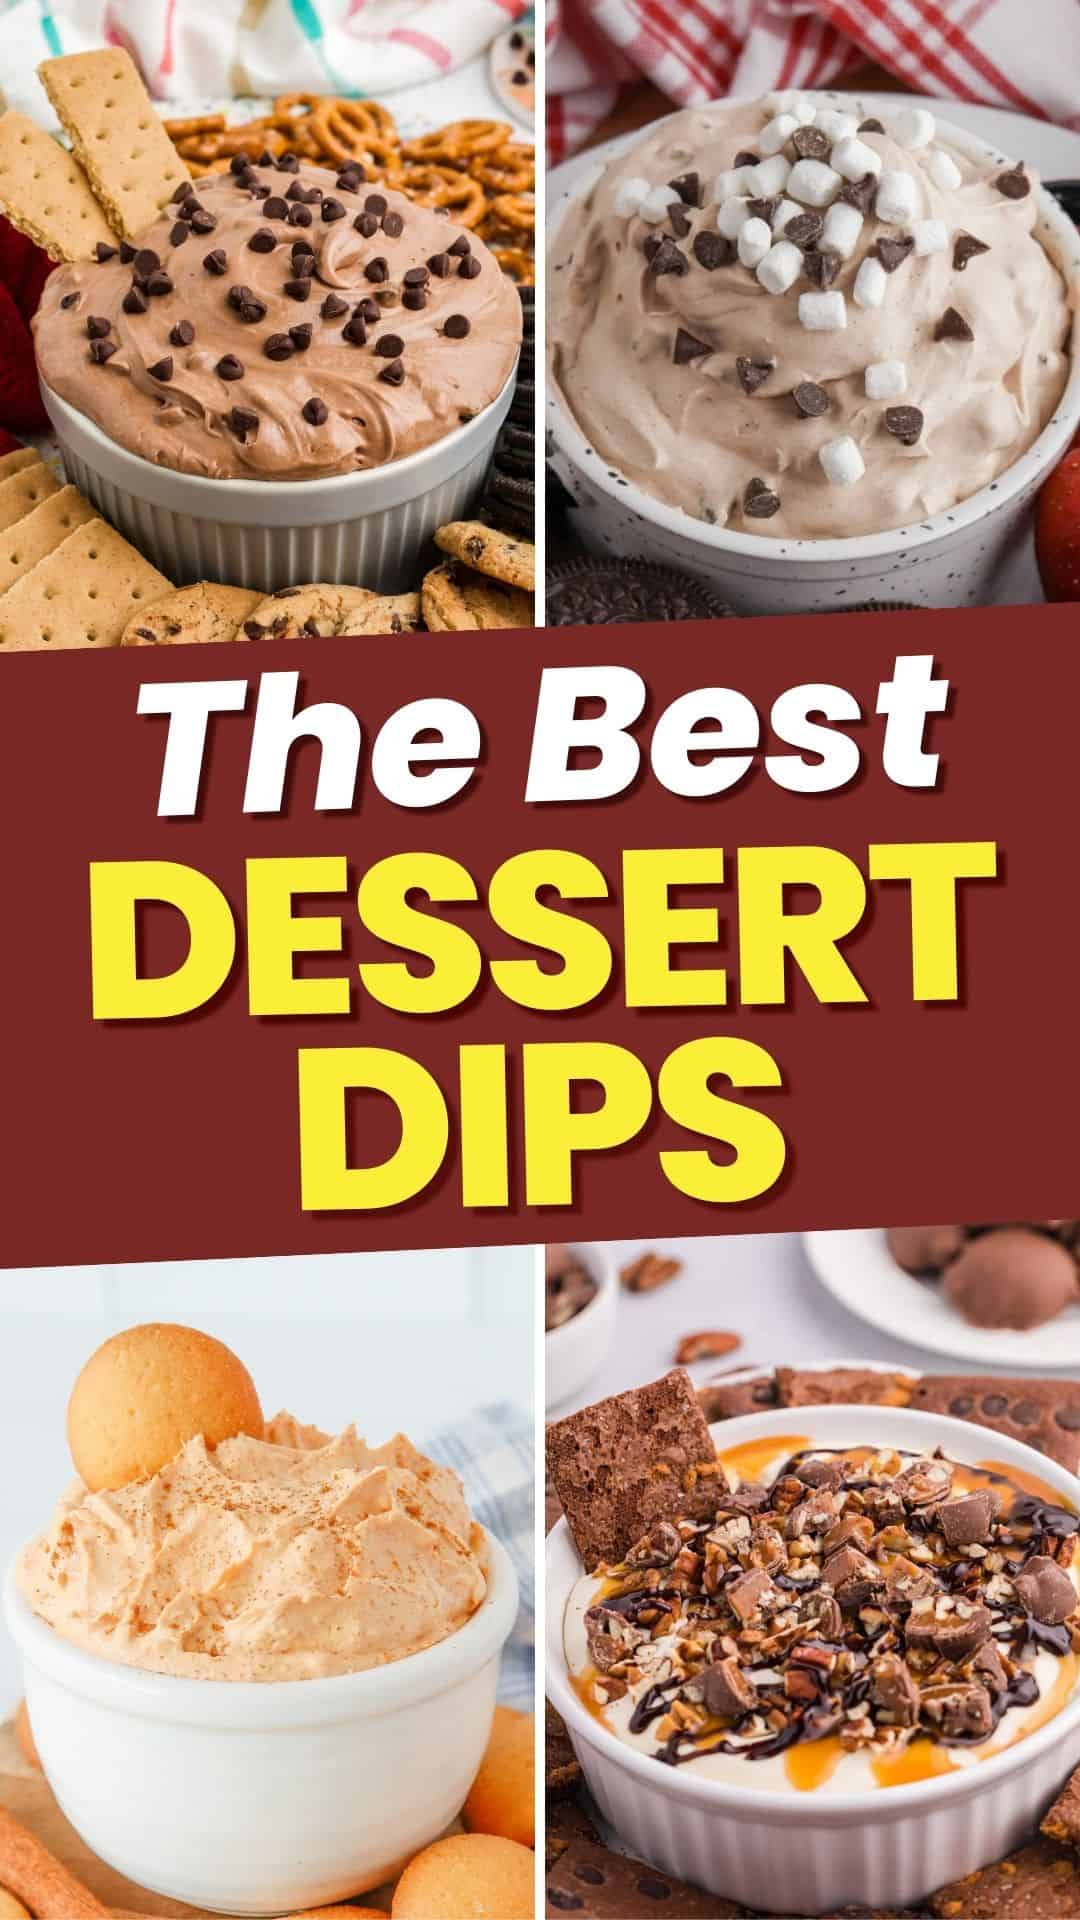 The Best Dessert Dips collage pin.